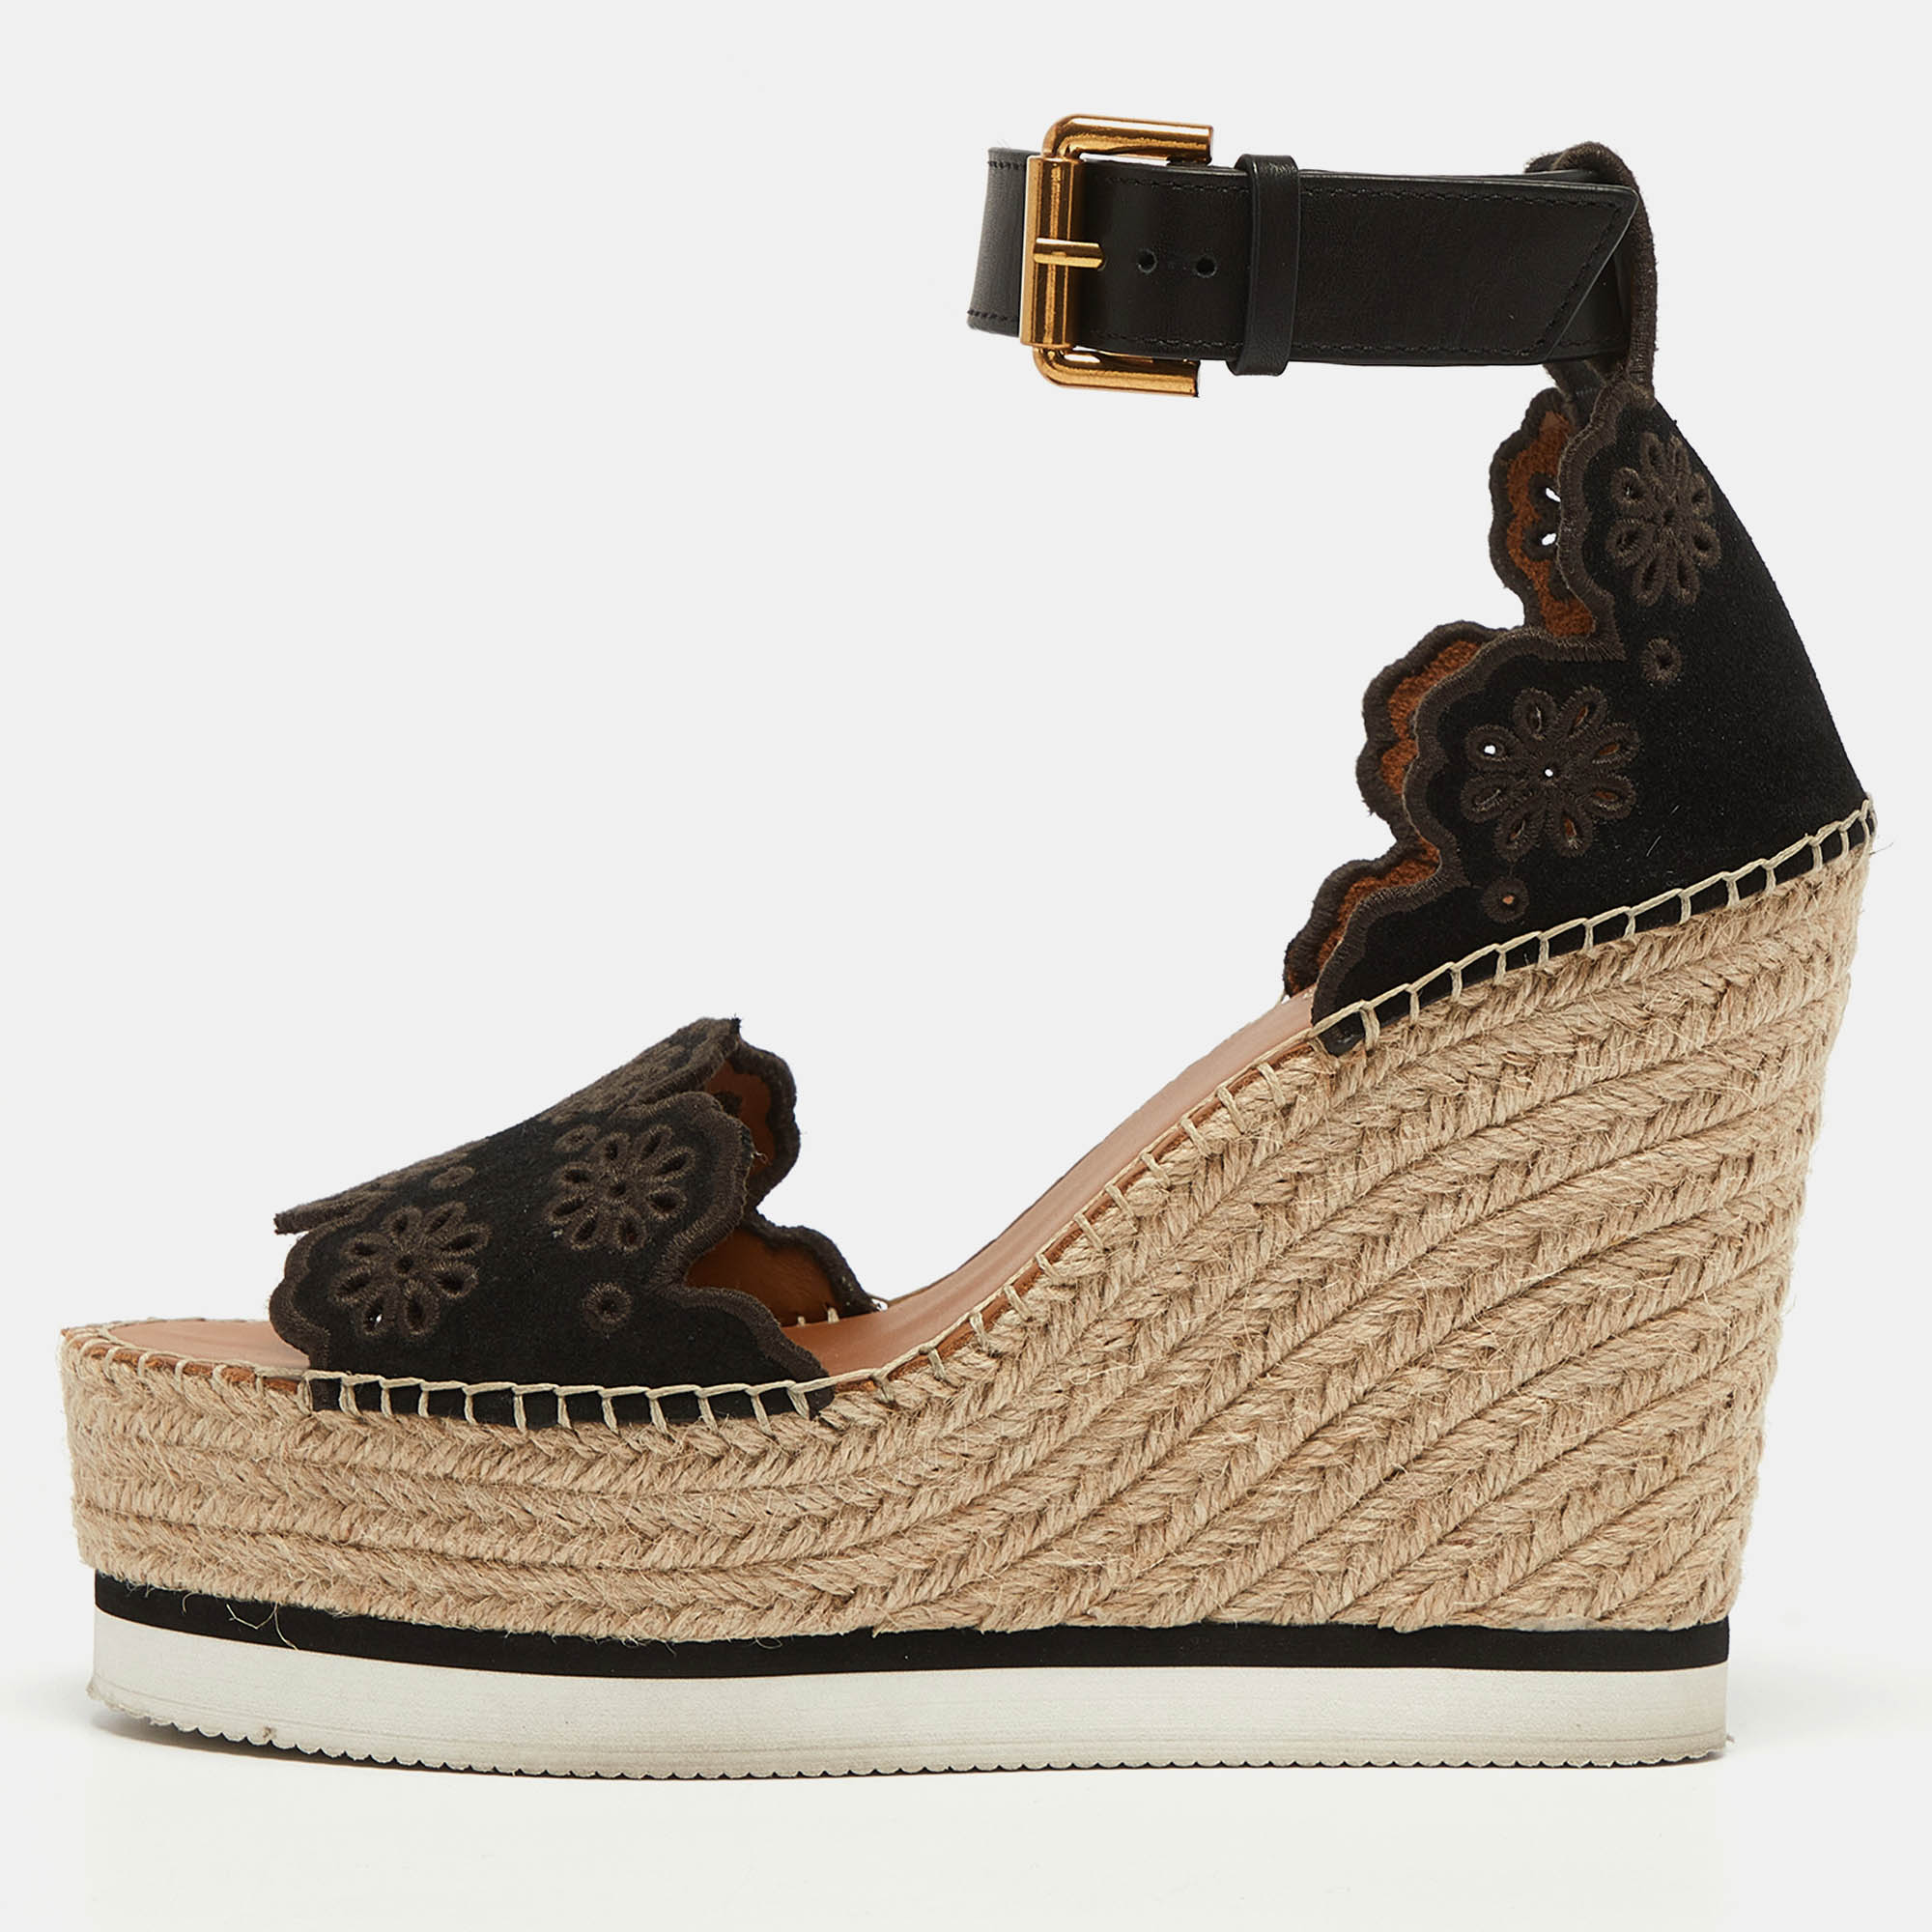 Pre-owned See By Chloé Black Suede And Leather Floral Lasercut Espadrille Wedge Sandals Size 40